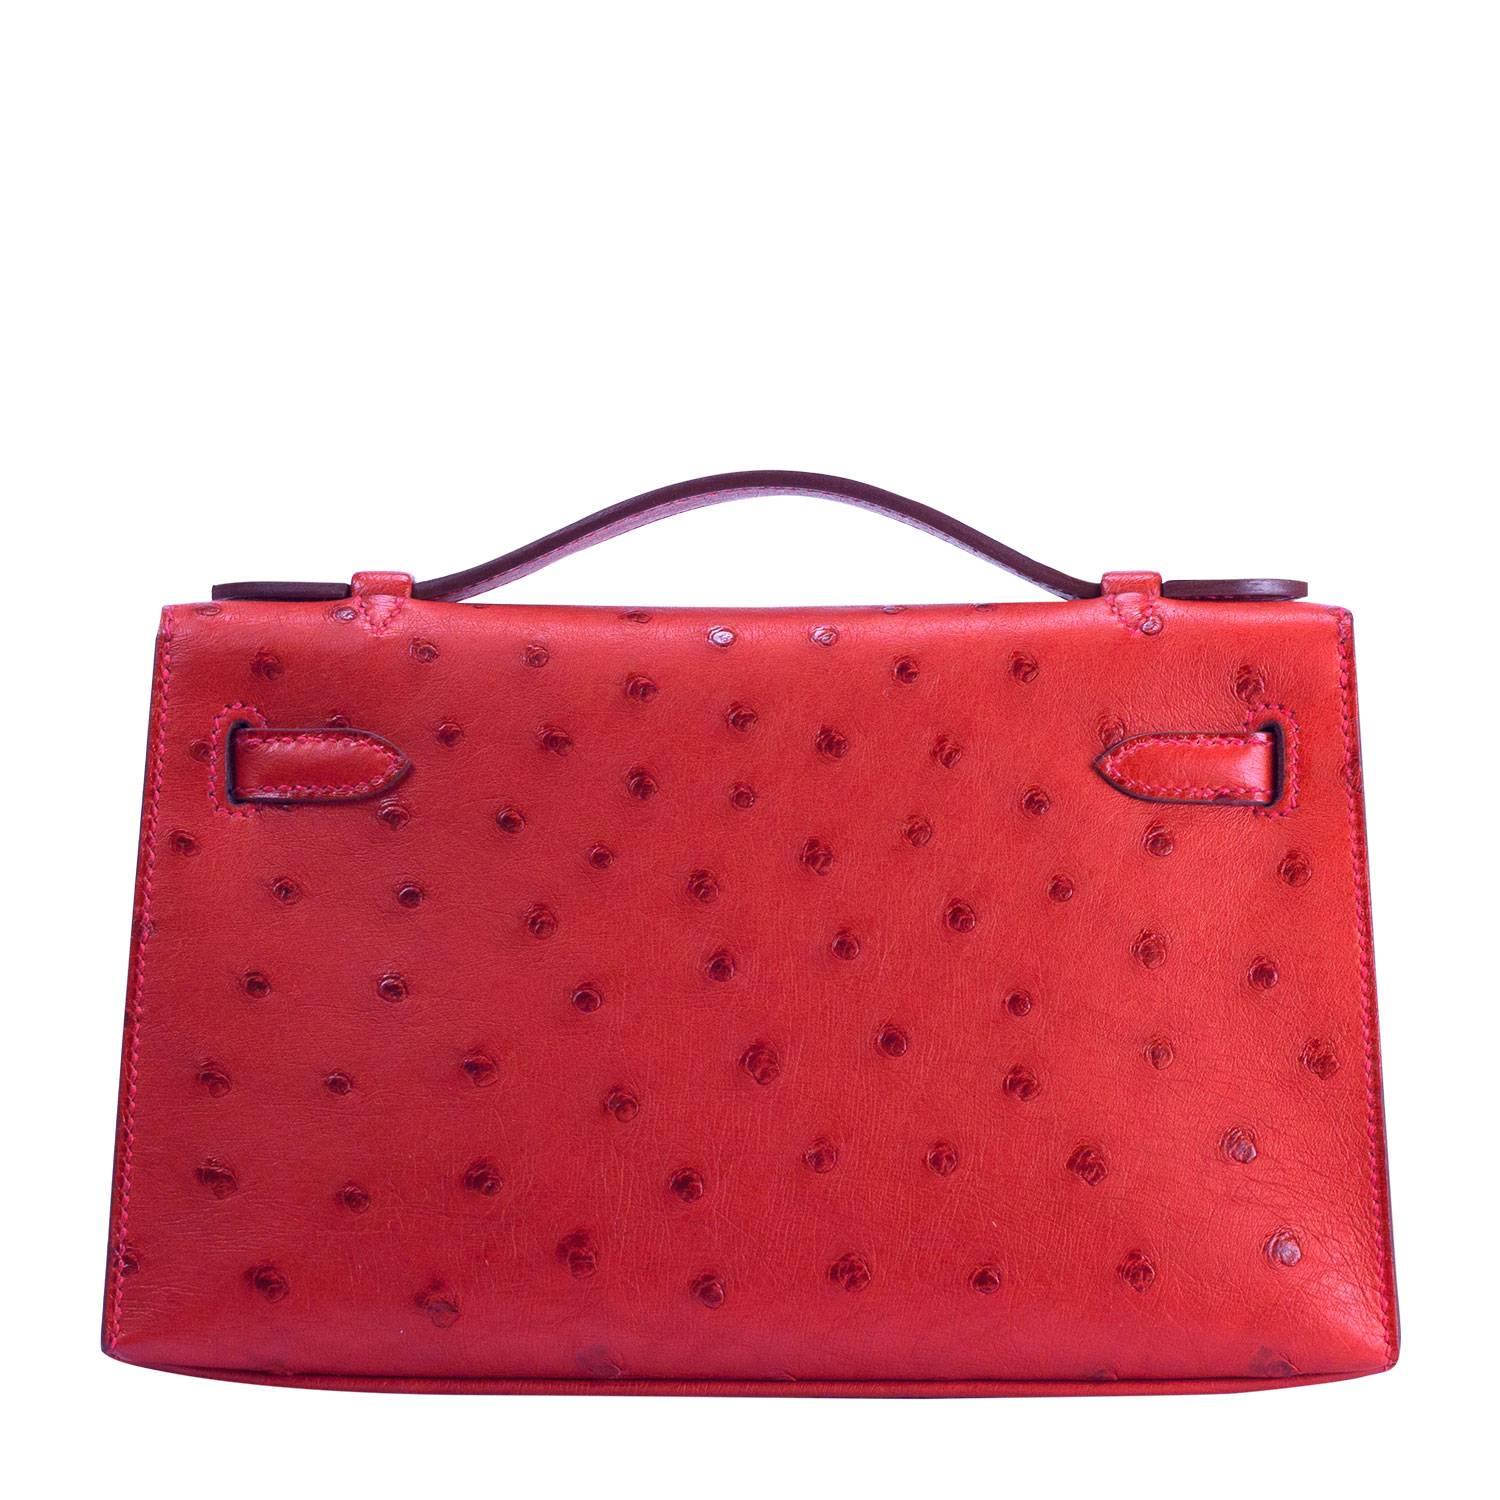 Hermes Kelly Pochette Ostrich Leather "Rouge Vif" Bright Red Color Gold Hardware 2017

Pristine condition. Pre-owned and never used.

Bought it in Hermes store in 2017.

Model: Kelly Pochette.

Composition: Ostrich